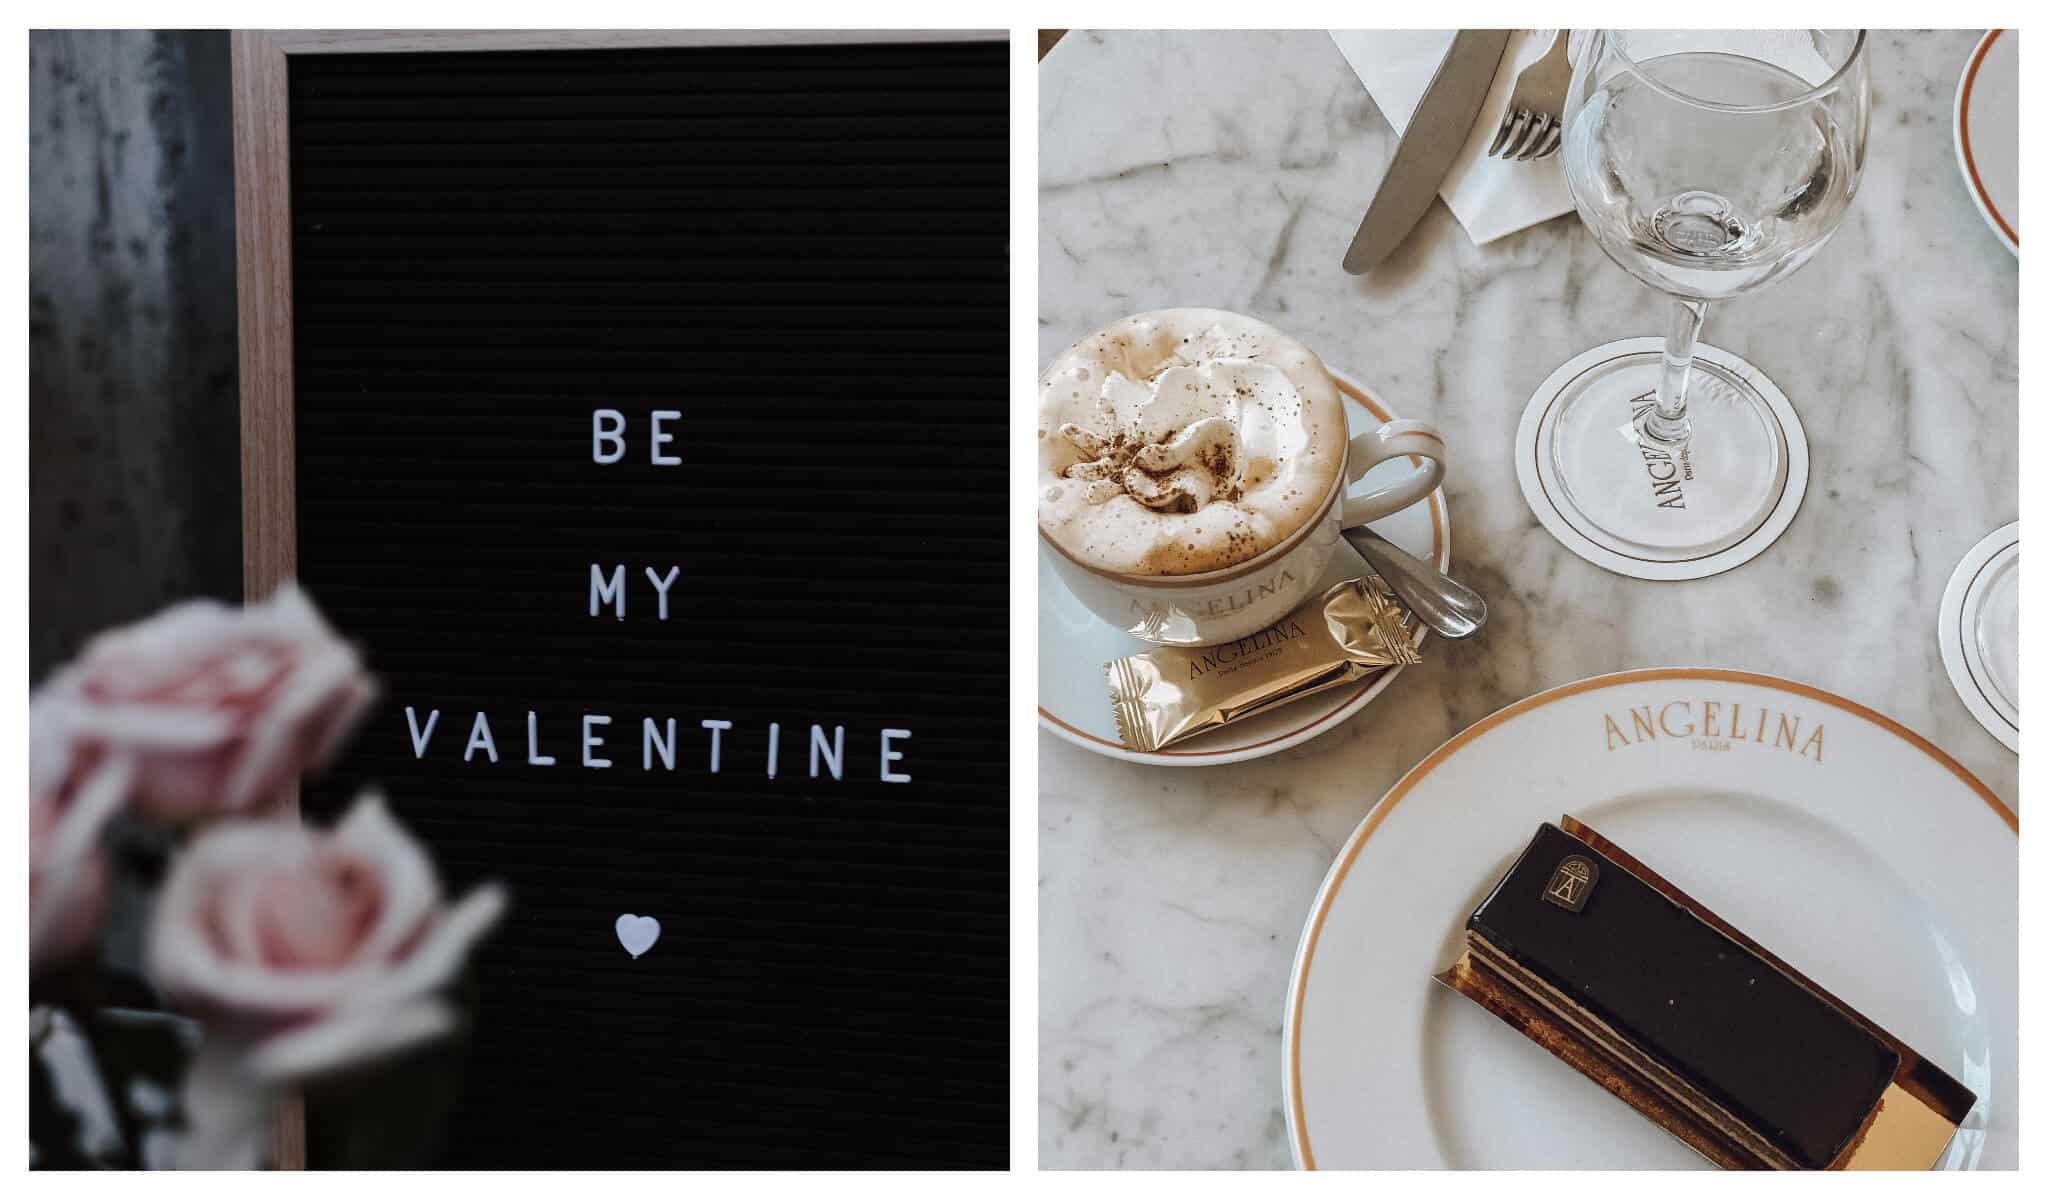 Left: A black board which says "Be My Valentine" and a pink rose; Right: A dessert table at Angelina Paris with hot chocolate and a chocolate cake. 